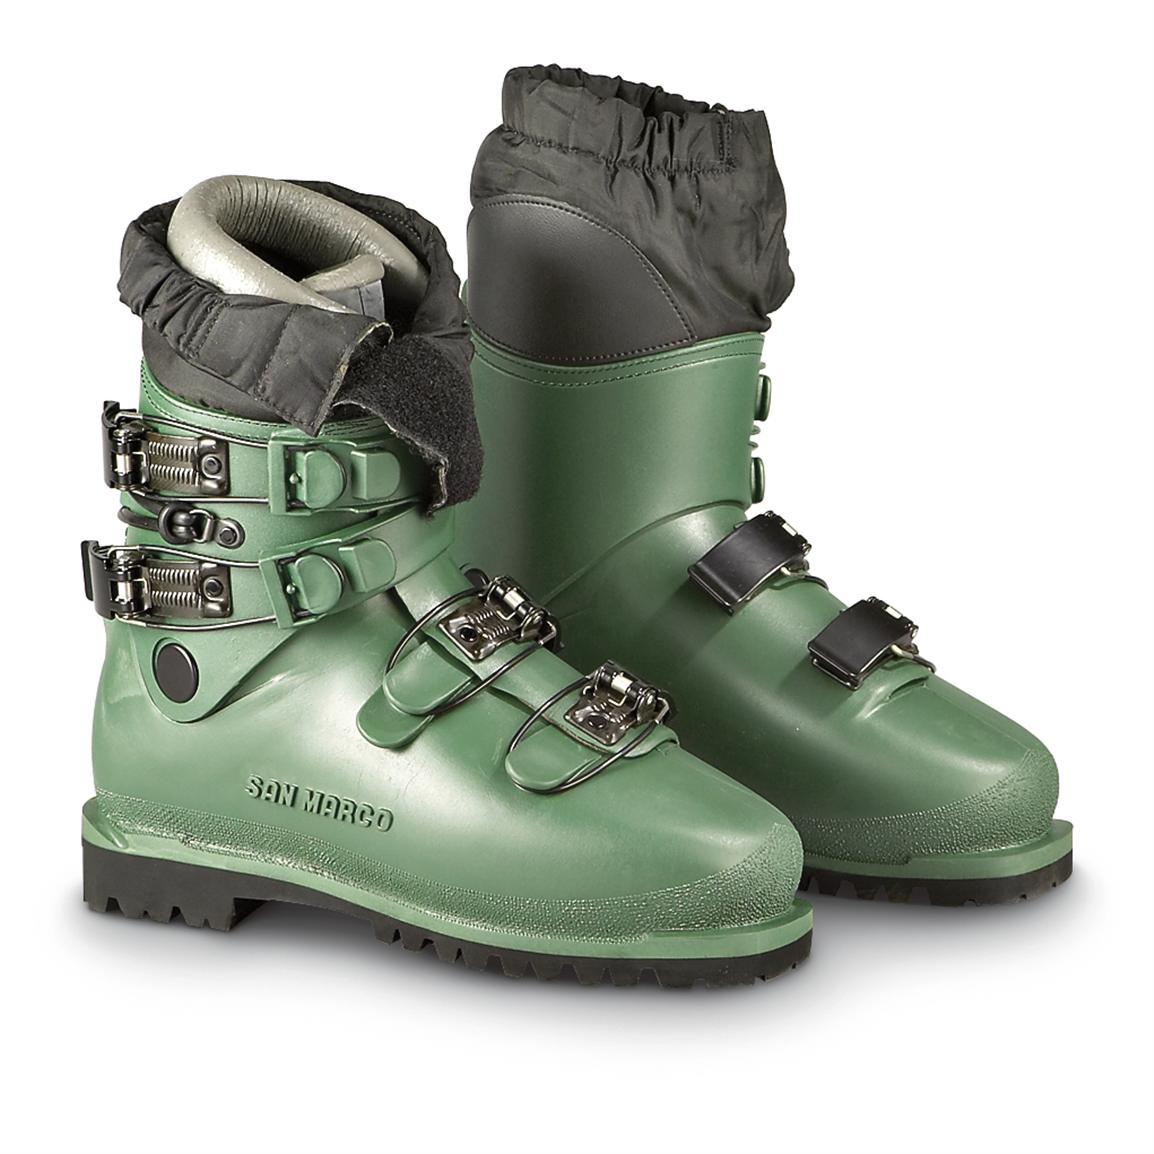 Surplus  Military Boots  Shoes  Winter  Snow Boots  New Italian ...